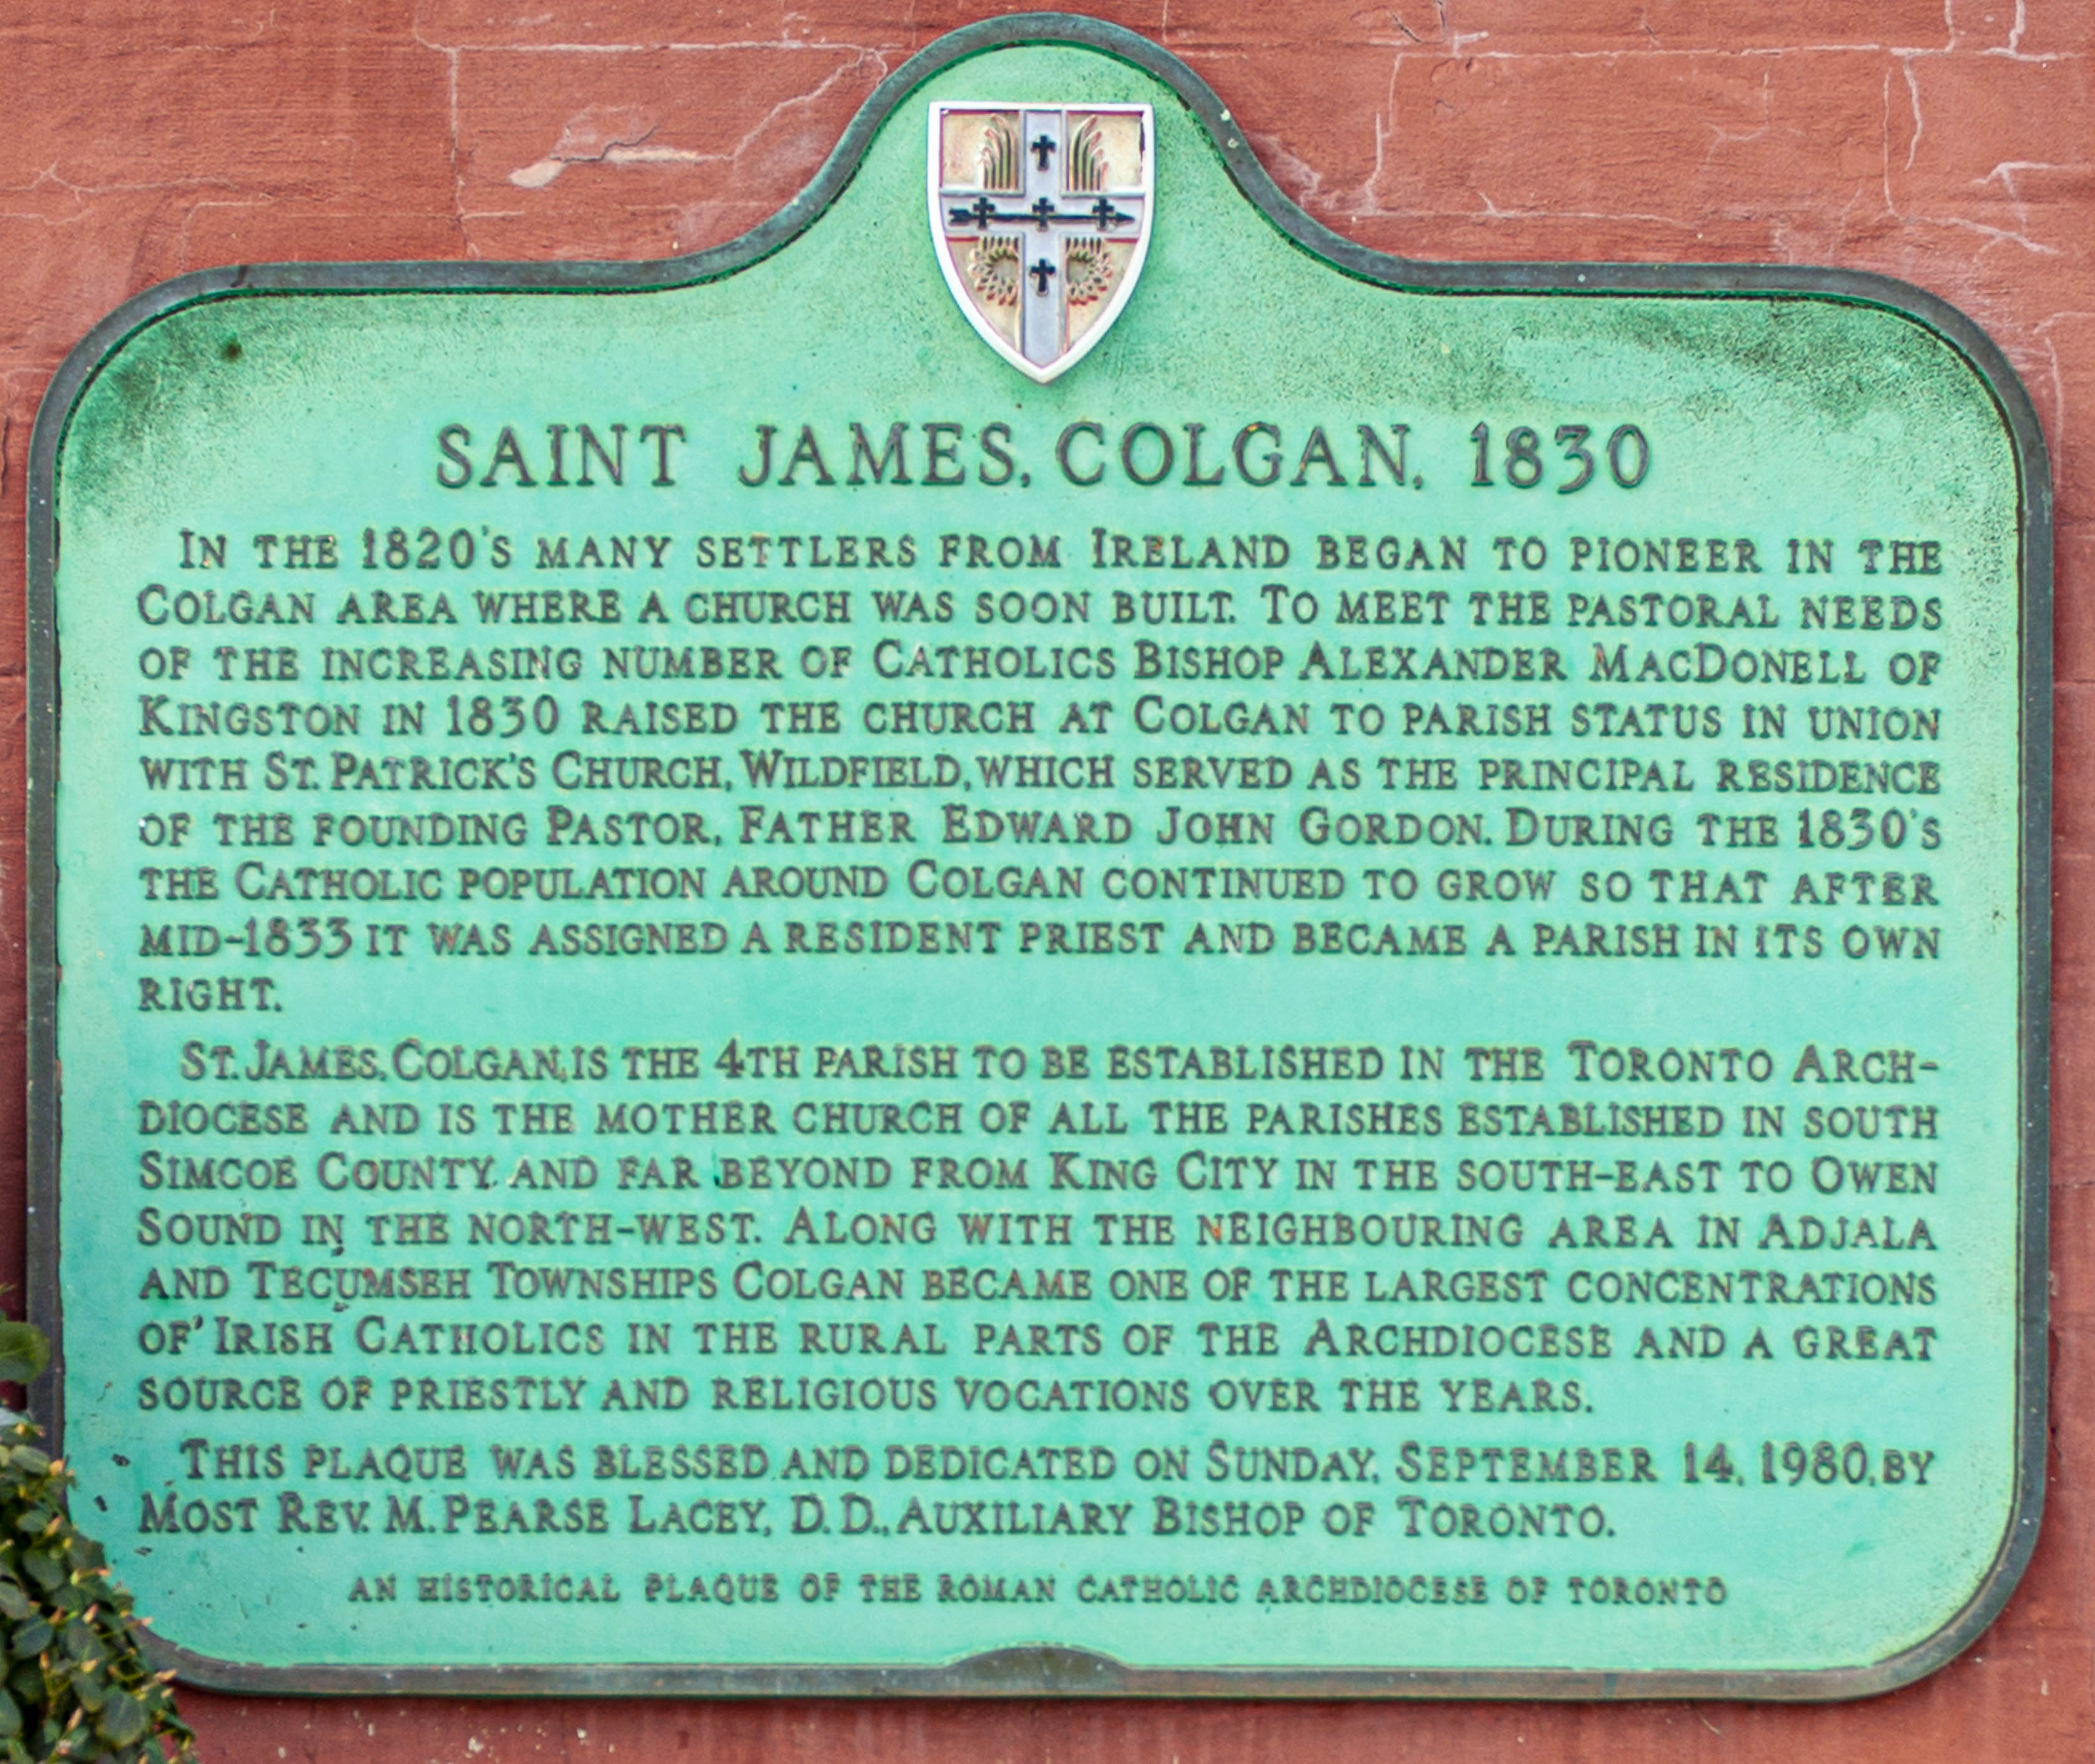 Plaque on the wall of the history of St. James Colgan